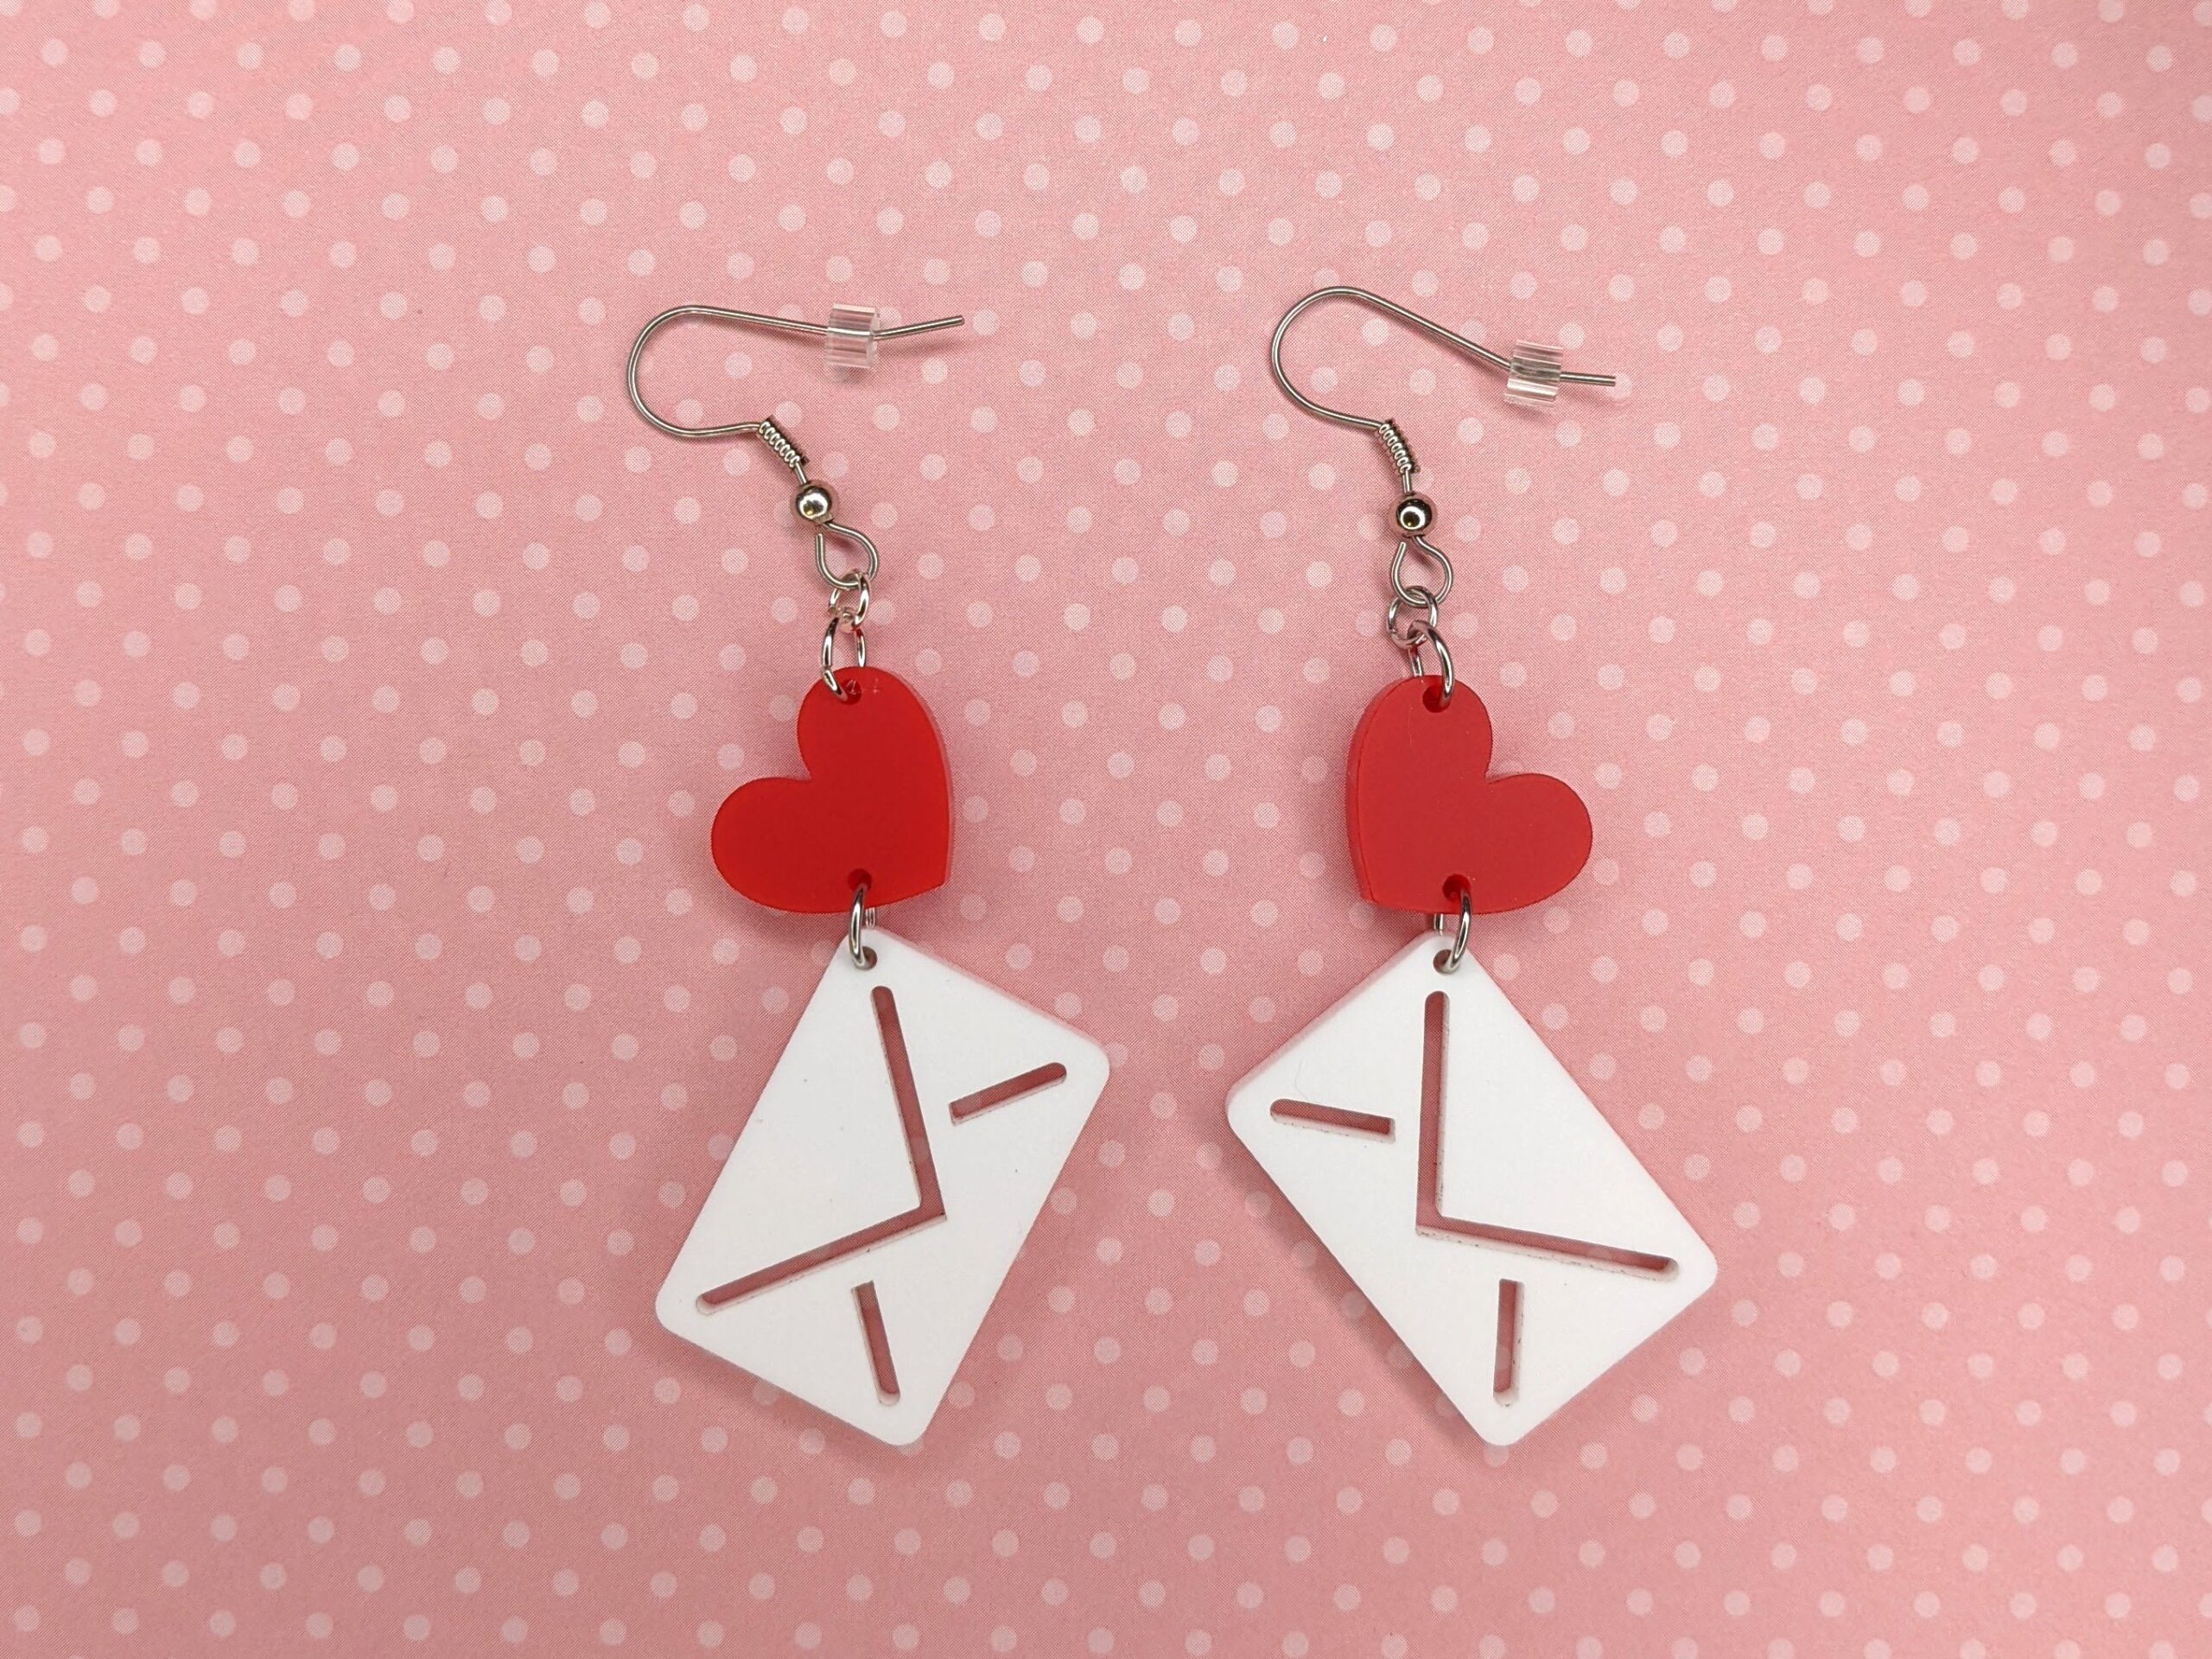 Finished Acrylic Love Letter Earrings - Custom Laser-Cut Jewelry Collection  – Uniquely Inviting